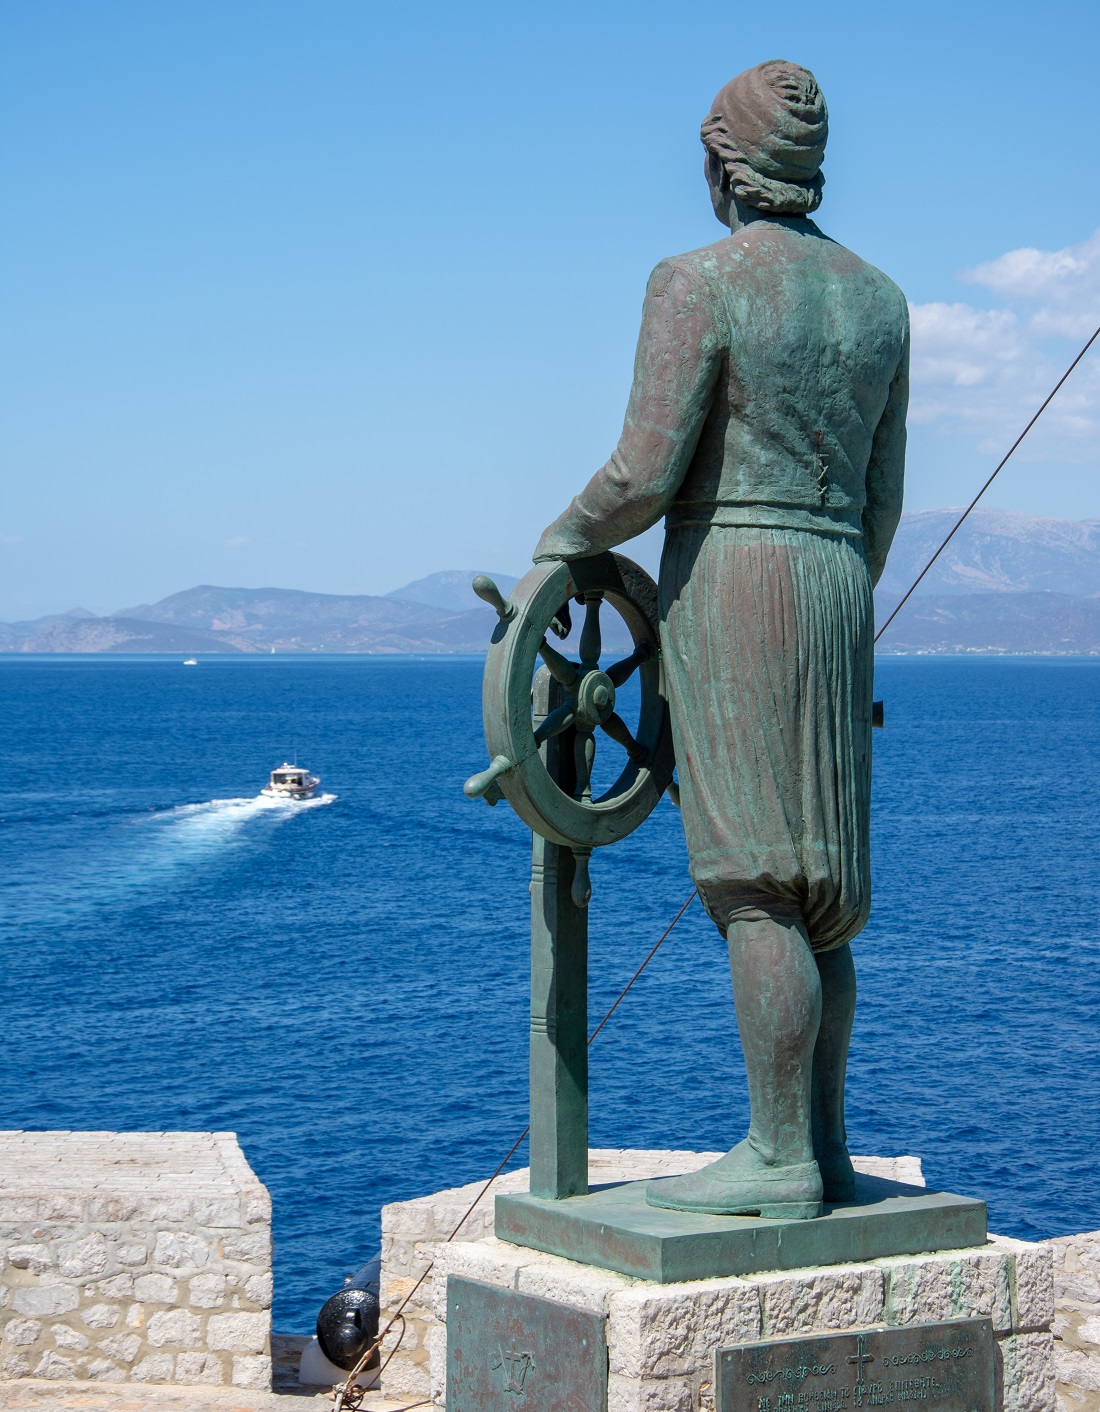 The statue of Miaoulis in Hydra